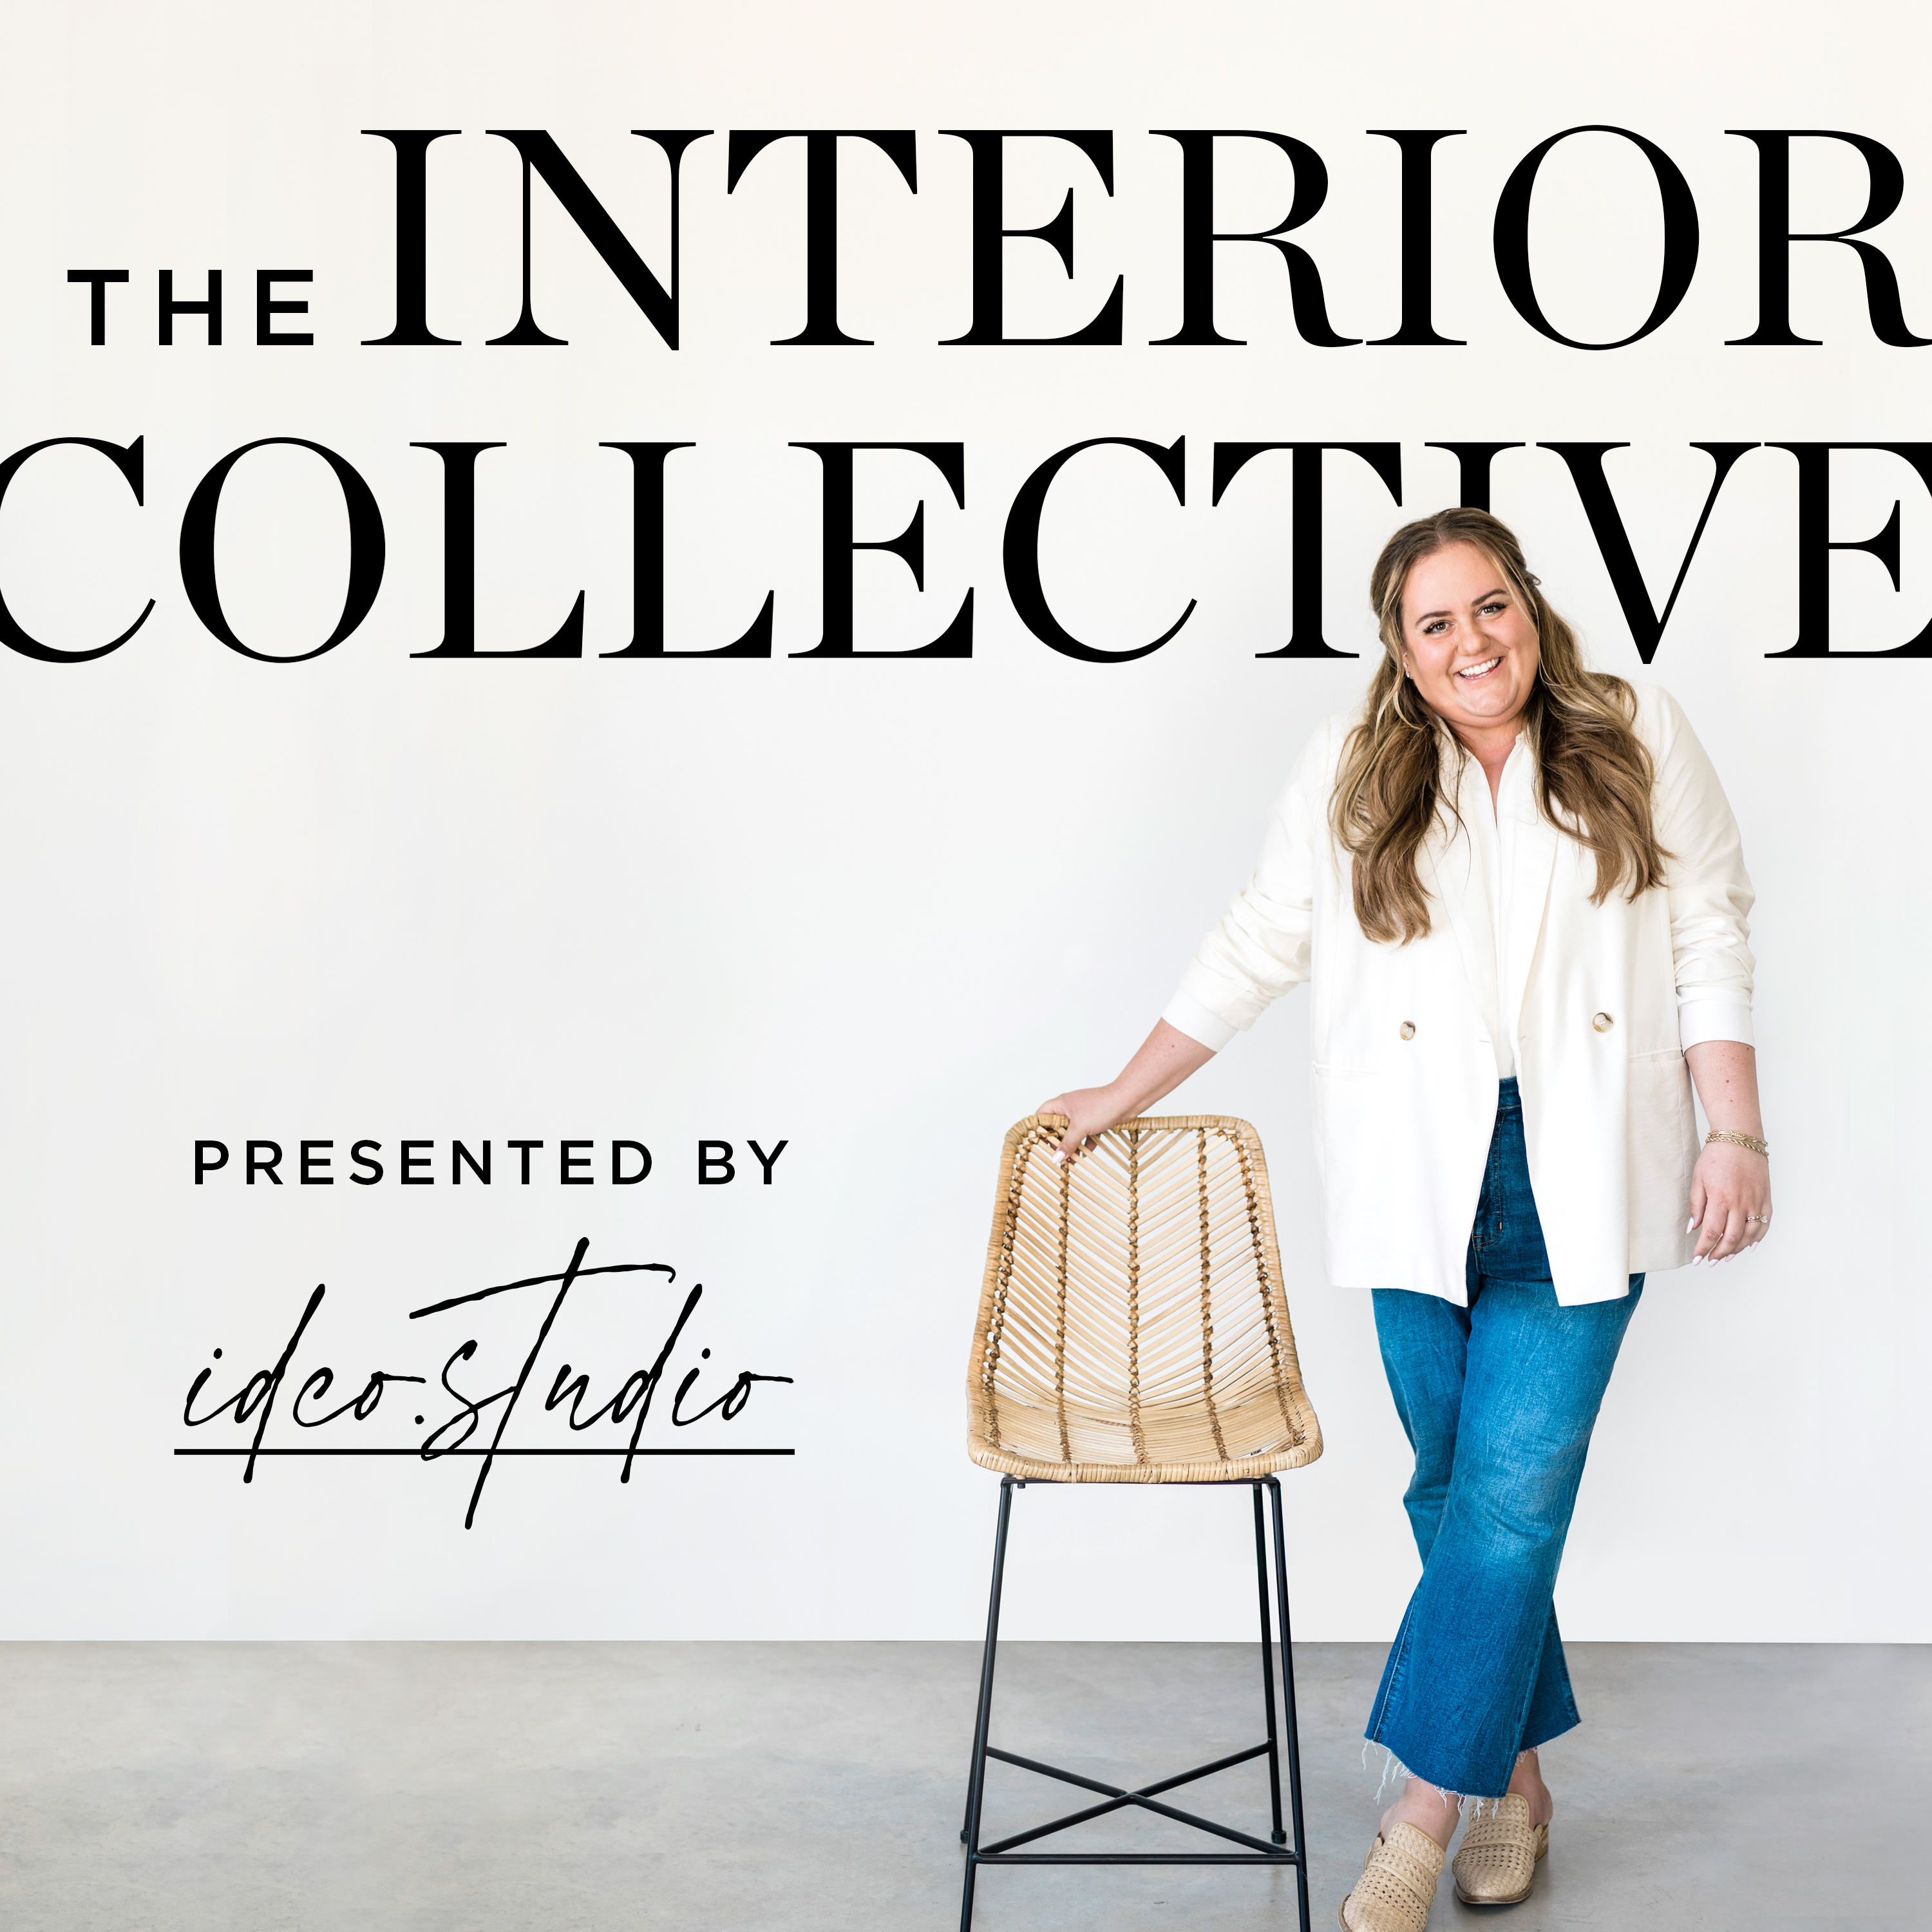 Welcome to The Interior Collective